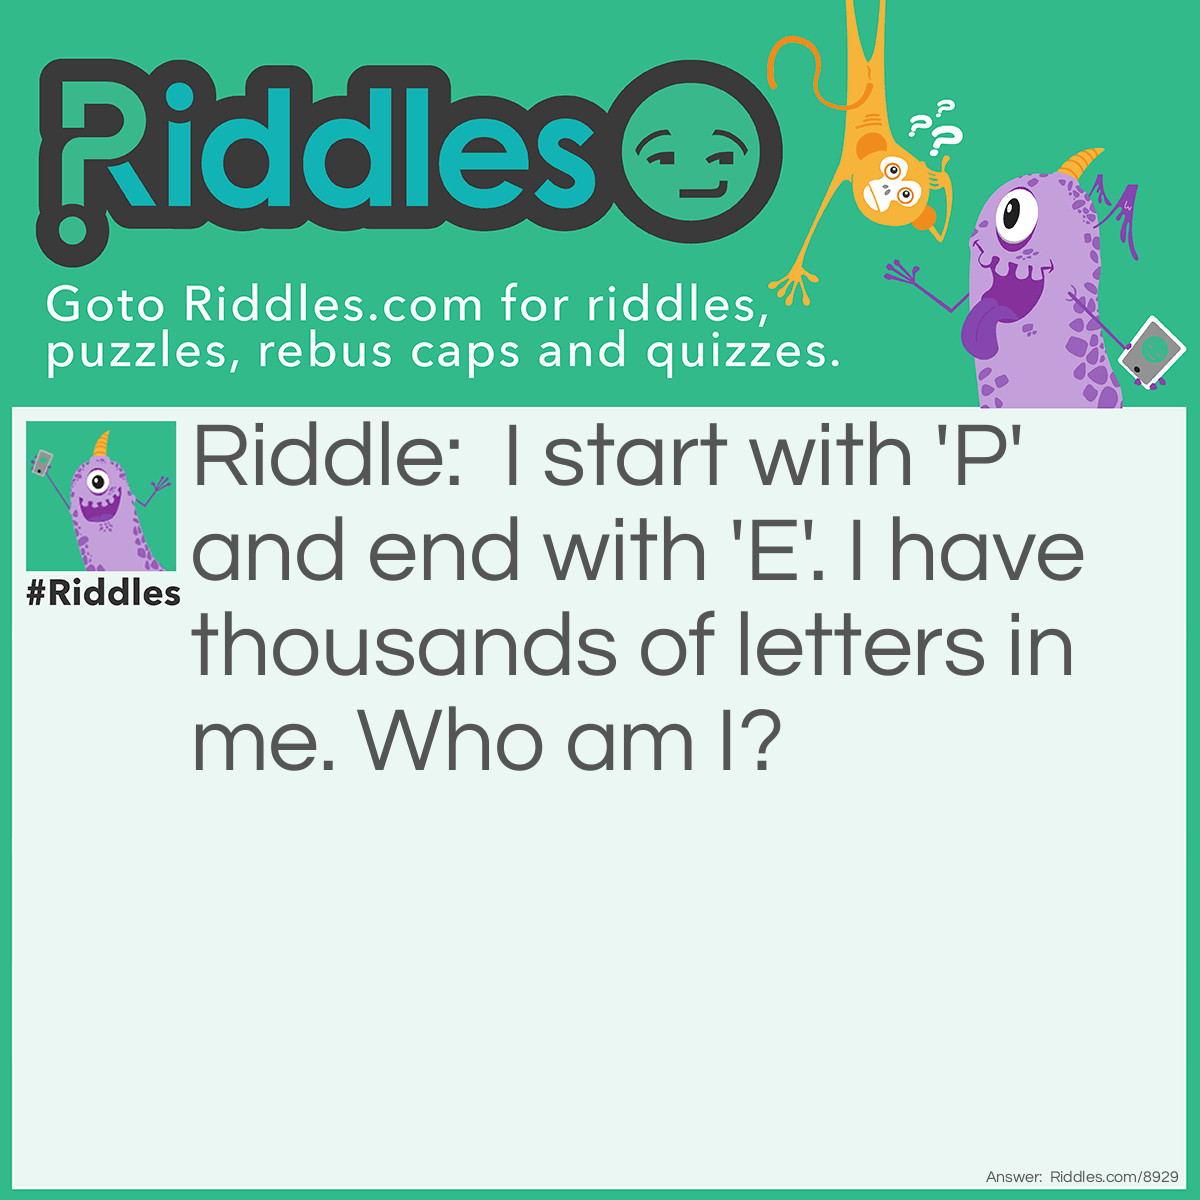 Riddle: I start with 'P' and end with 'E'. I have thousands of letters in me. Who am I? Answer: A post office.